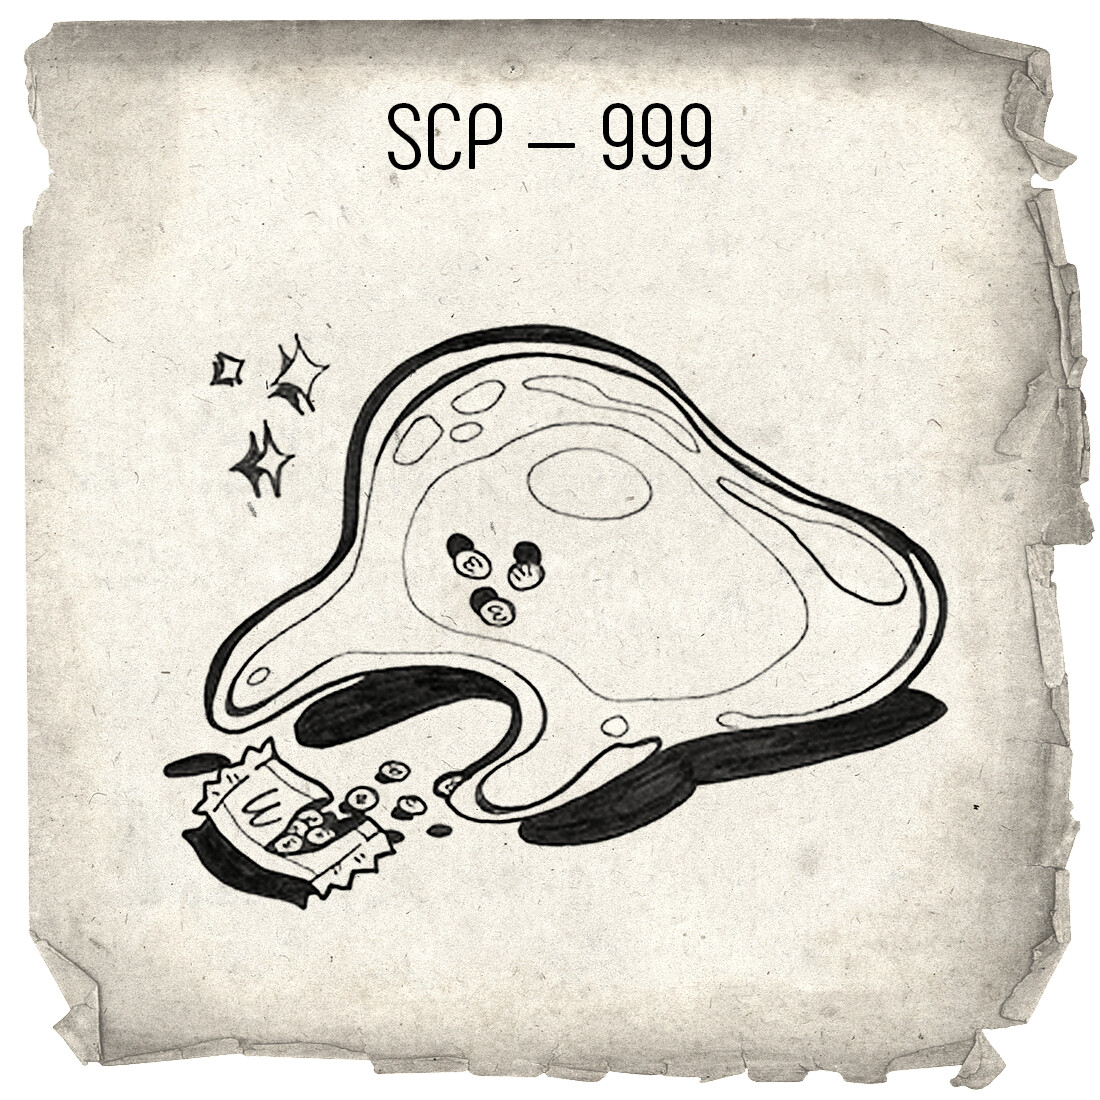 Luis HHS on X: Day 10 - SCP-999 O SCP mais fofo que existe #inktoberday10  #Inktober2019 #inktober #SCPfoundation #SCP  / X